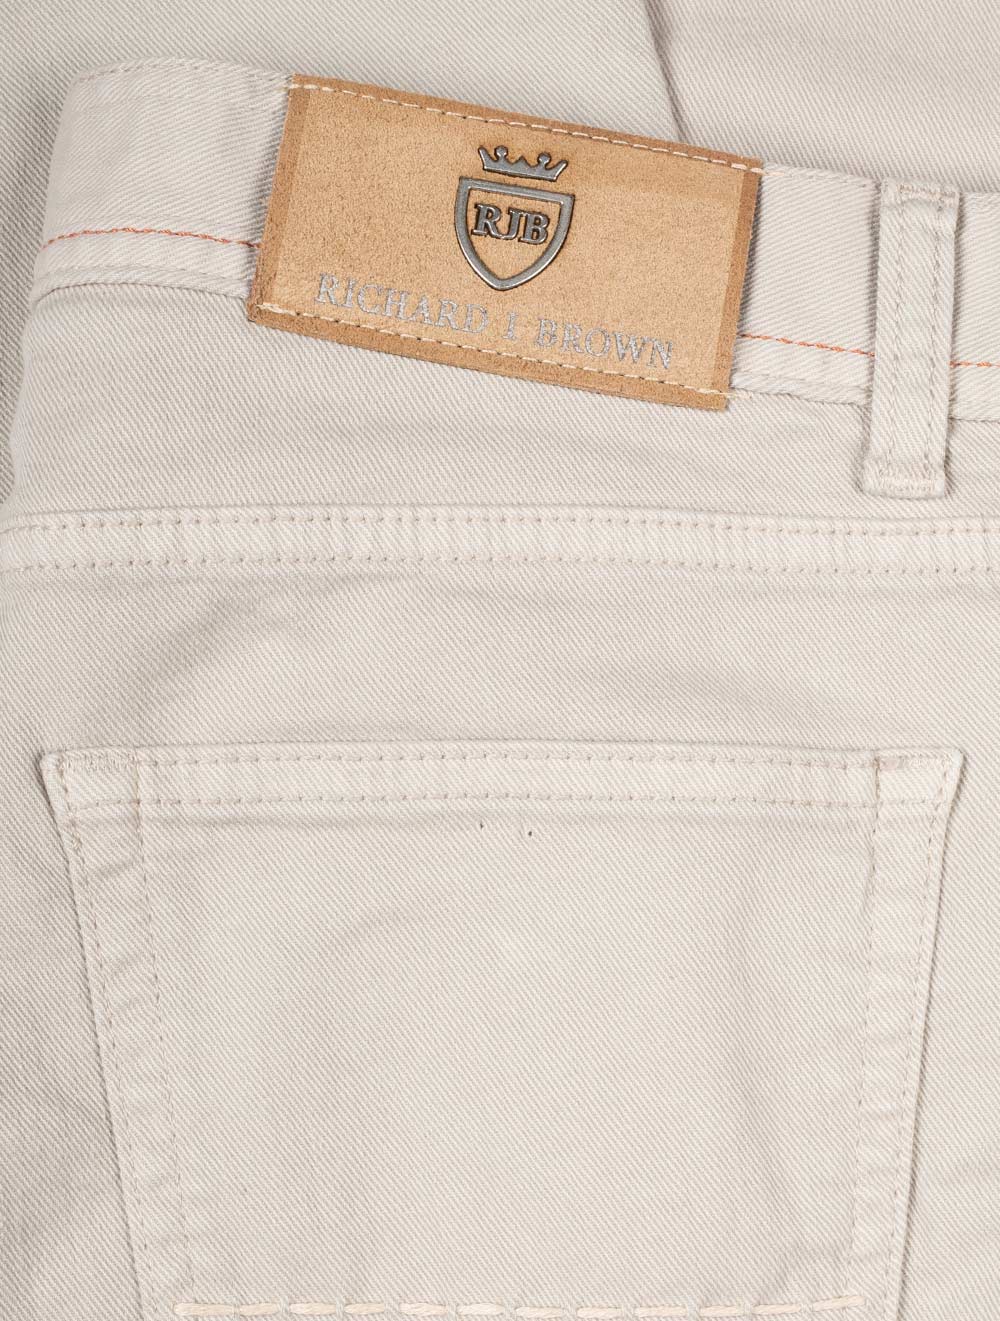 Icon Daily Comfort Jean Beige 410